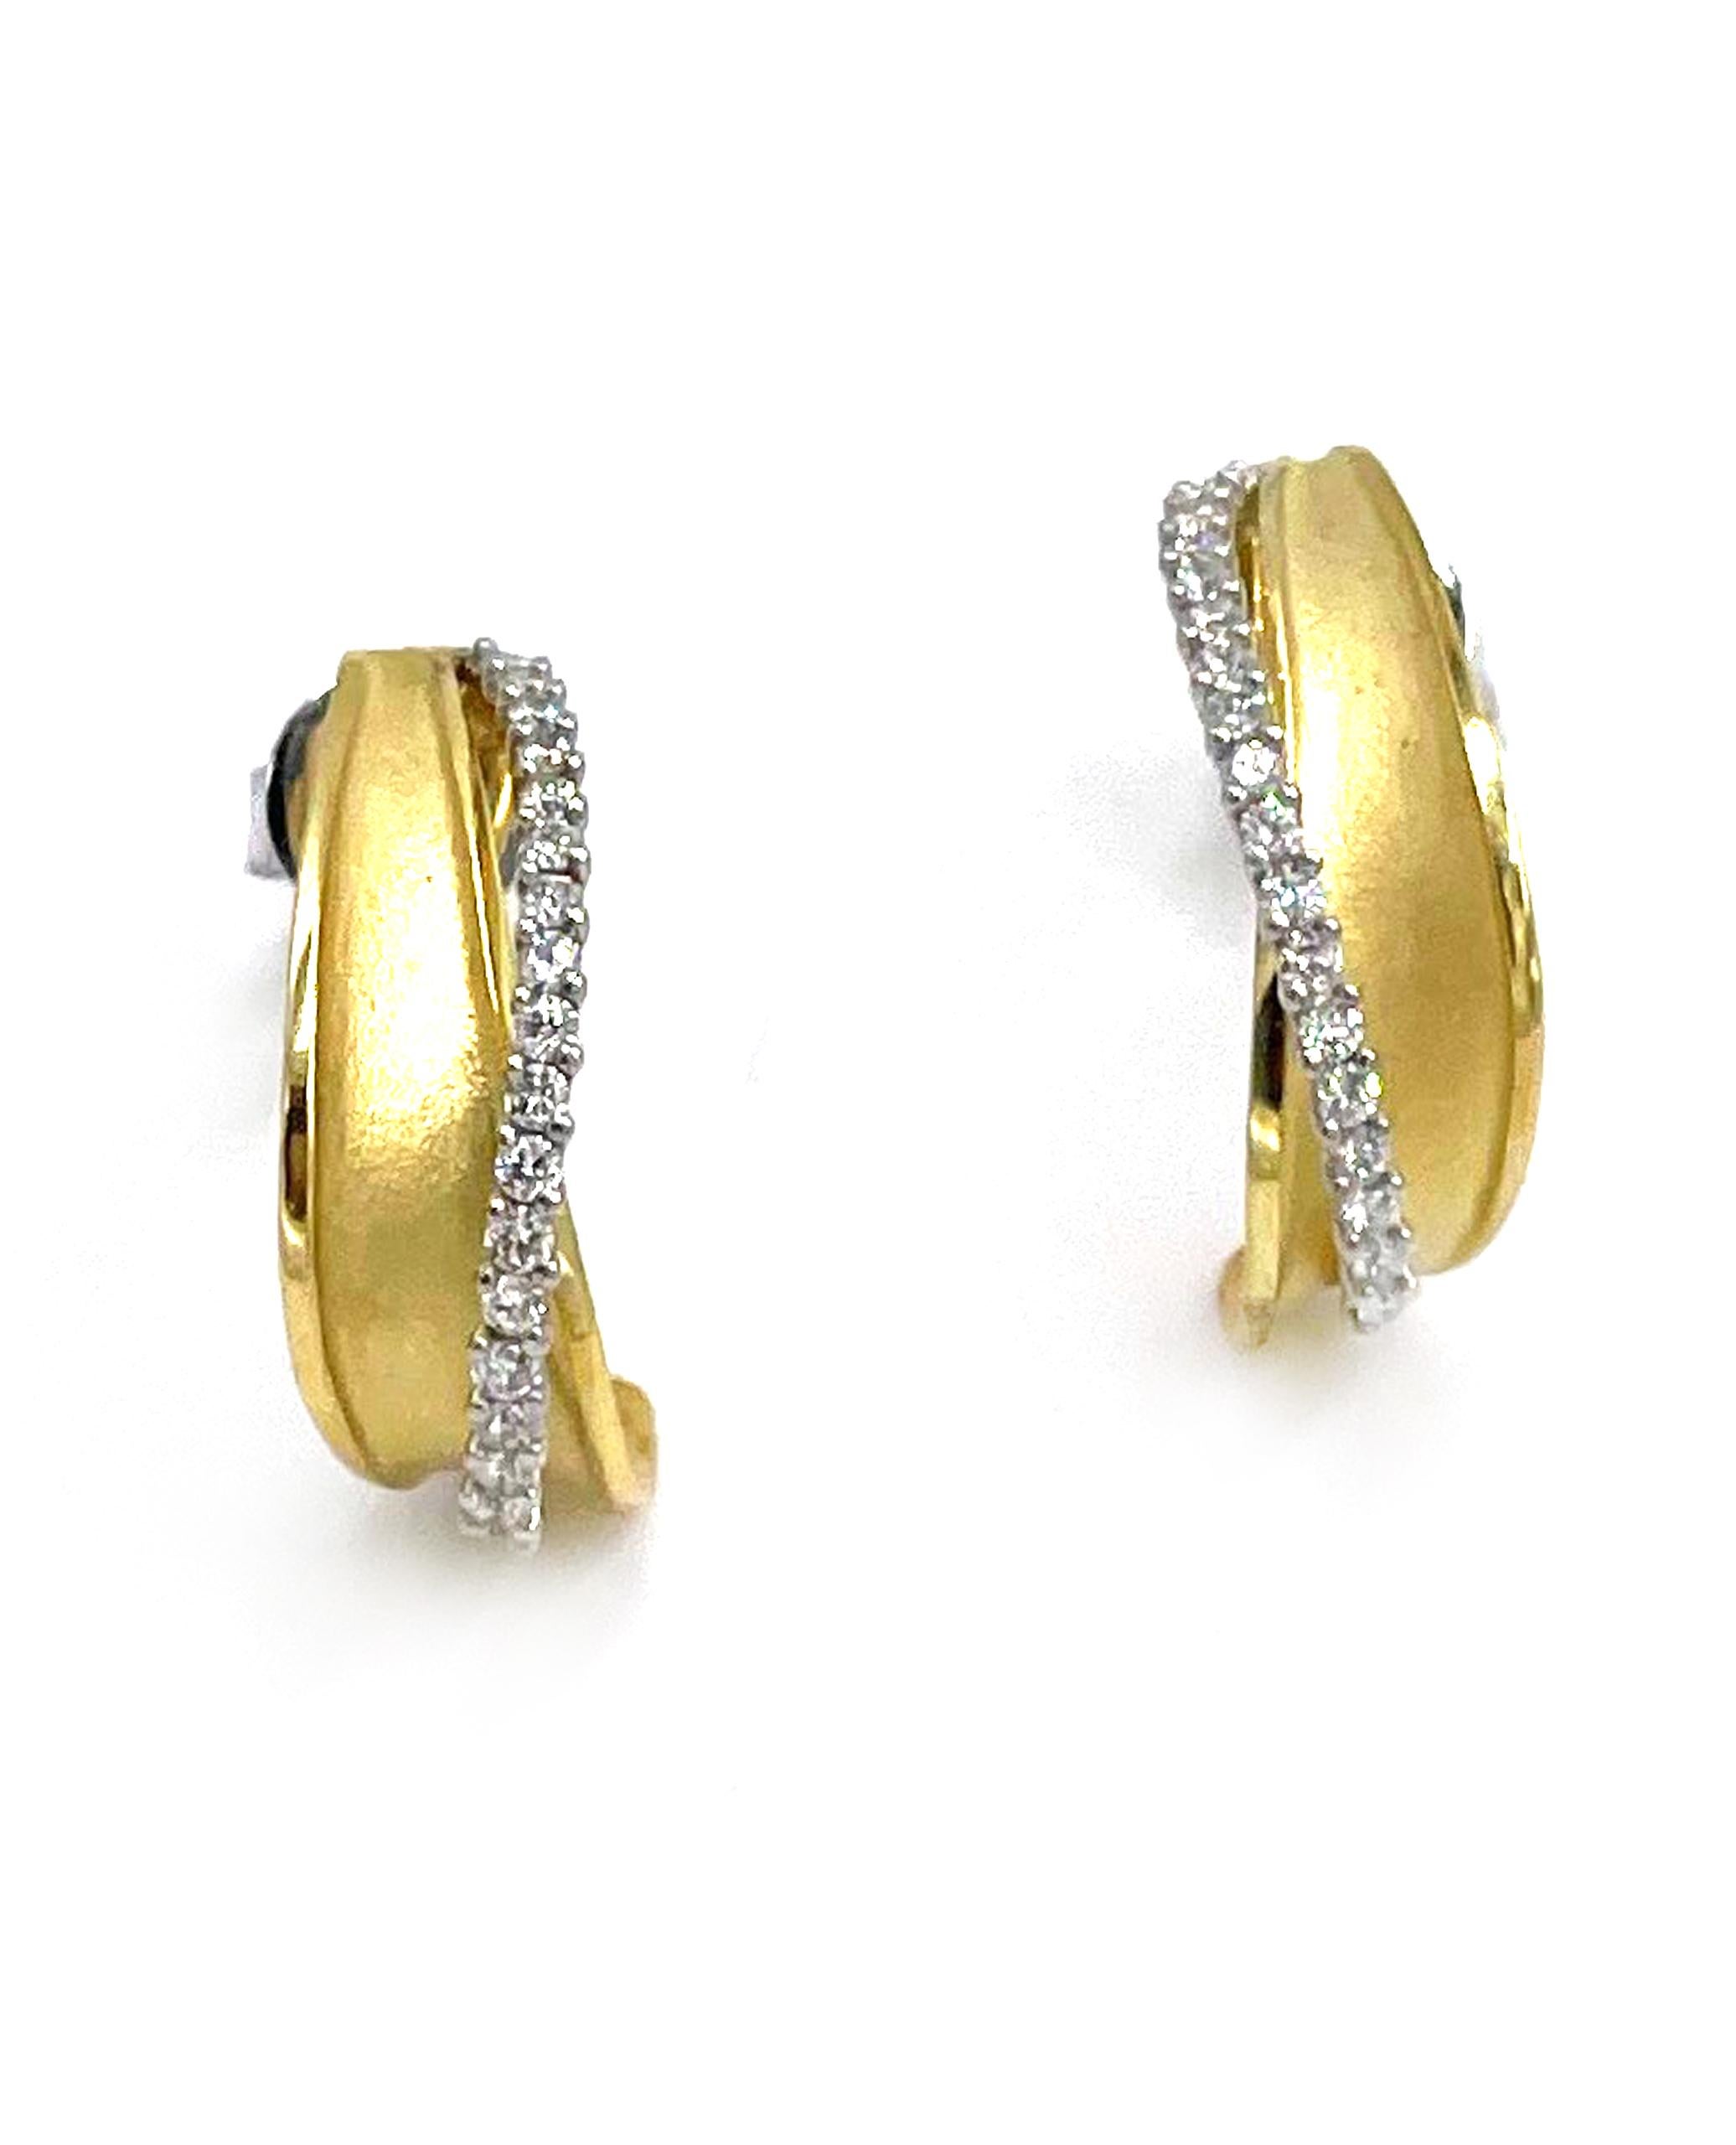 Not your average hoop earring.  Pair of 18K yellow and white gold earrings made by Simon G.  These earrings are furnished with 36 round brilliant-cut diamonds 0.27 carats total weight and a matte finish yellow gold detail. 

* Style No. NE188
* 0.50